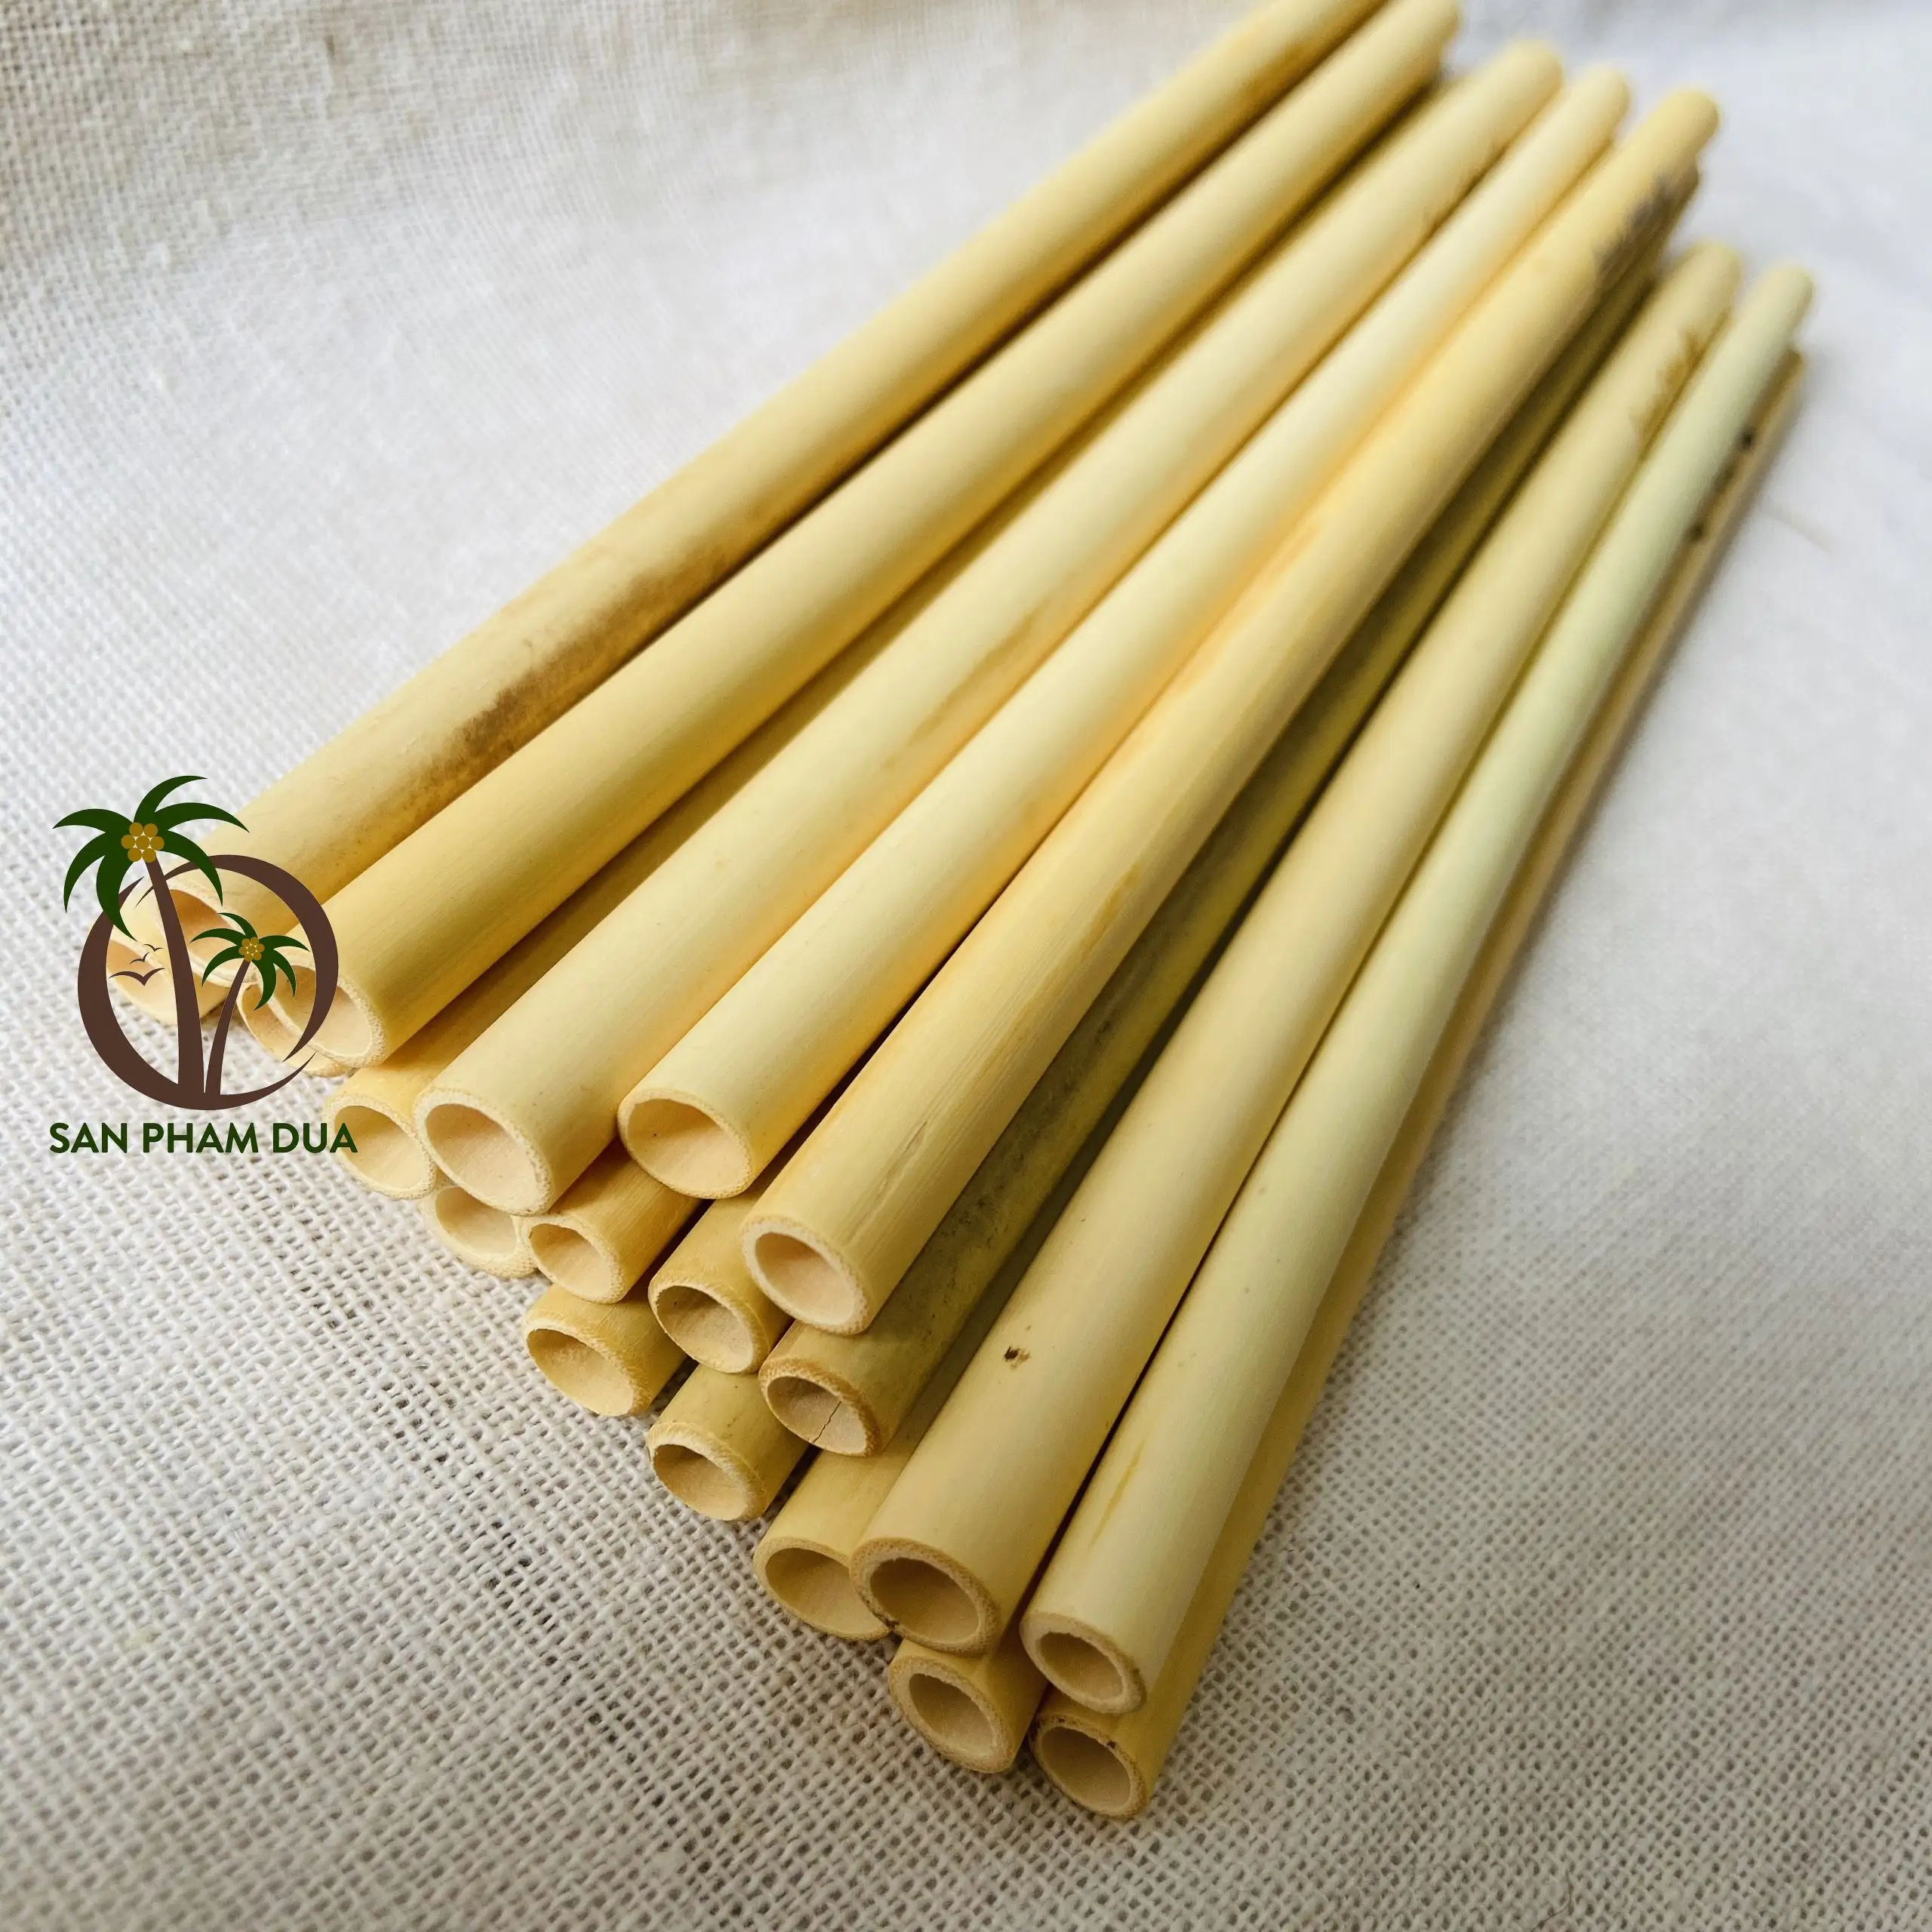 BAMBOO STRAW ECO FRIENDLY NATURAL BAMBOO STRAW WHOLESALE FROM VIETNAM HIGH QUALITY BAMBOO WOODEN STRAW